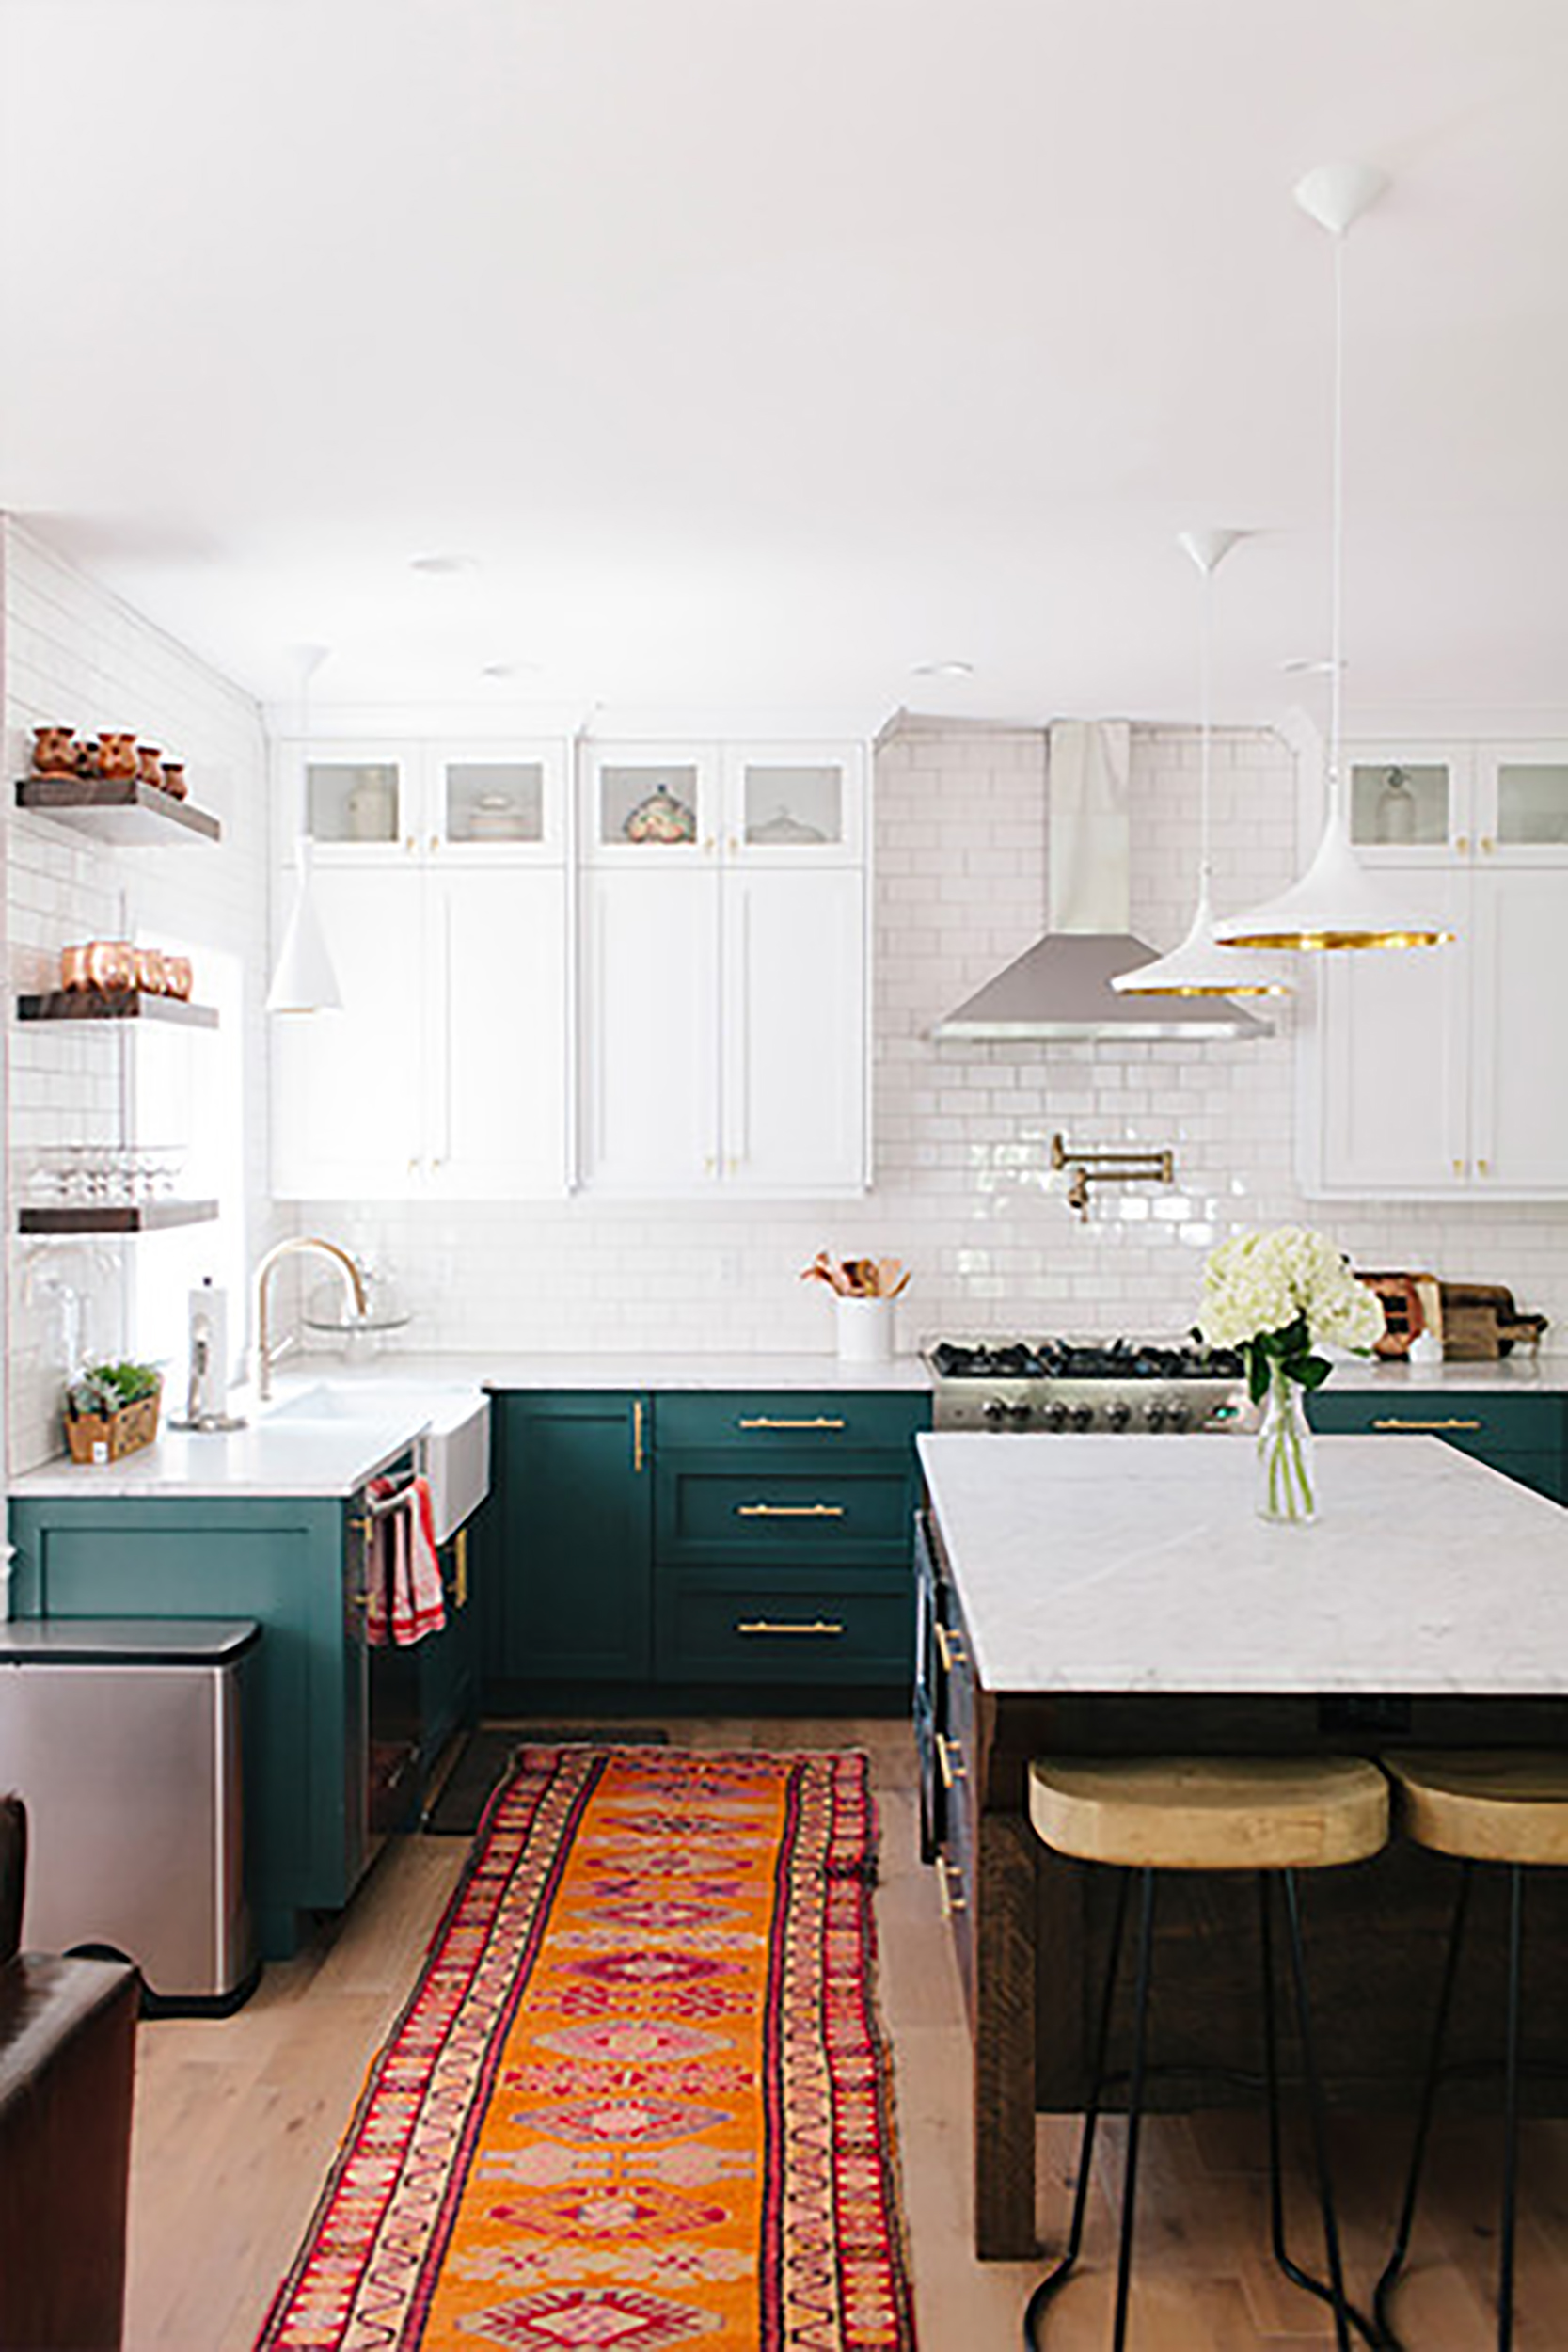 Trend We're Loving: Two Toned Kitchens